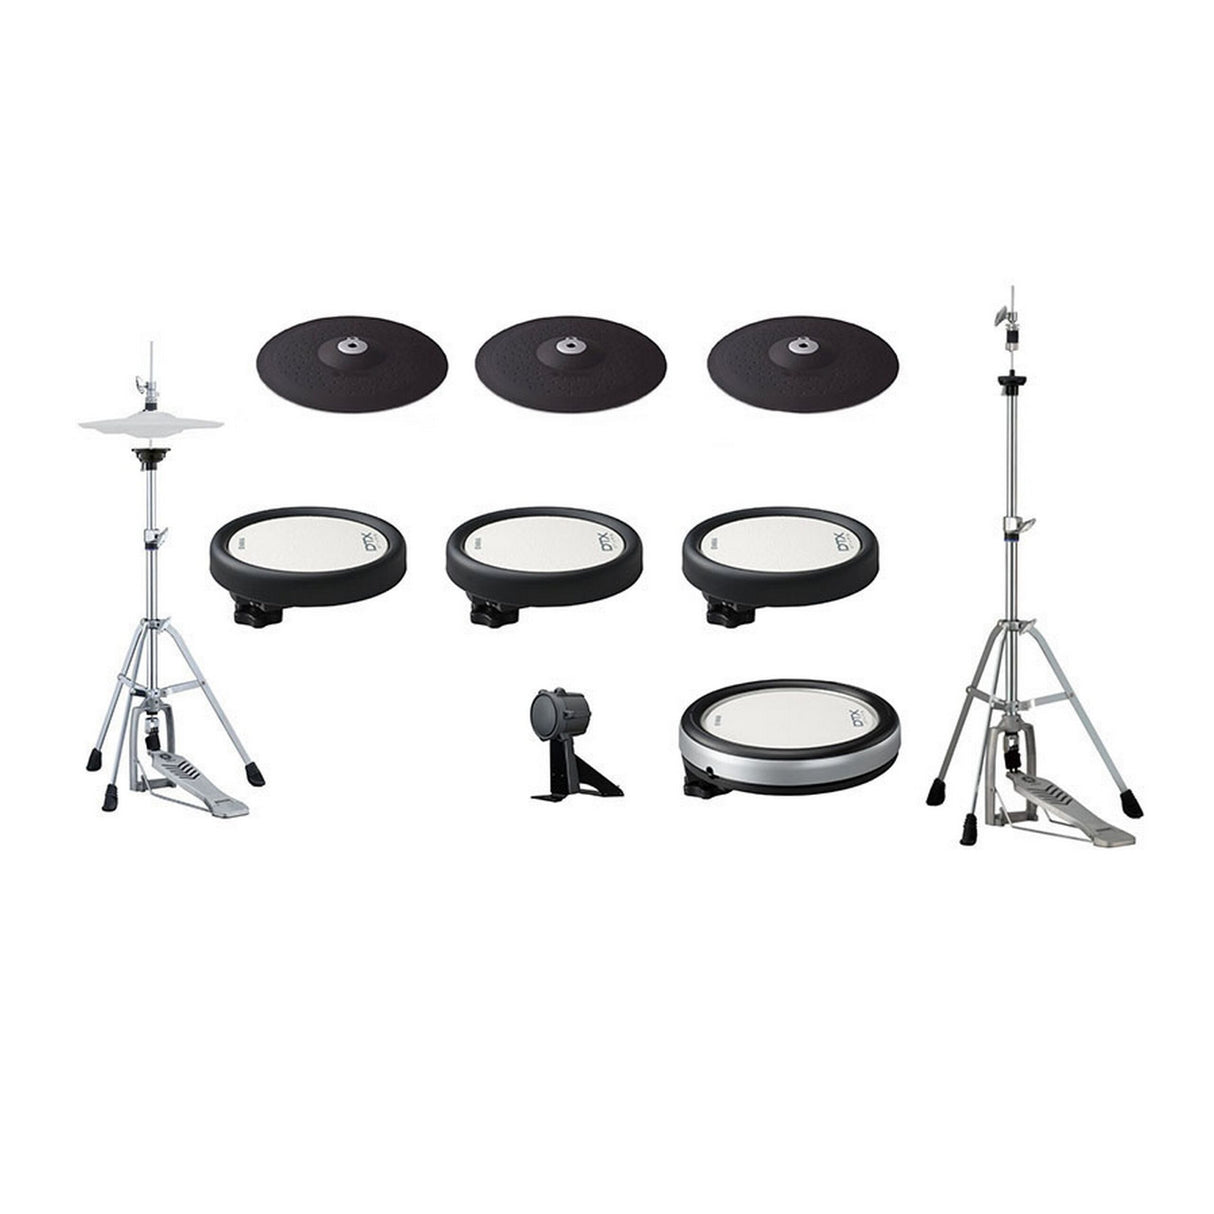 Yamaha DTP63-X Cymbal and Drum Pad Set for the DTX6K3-X